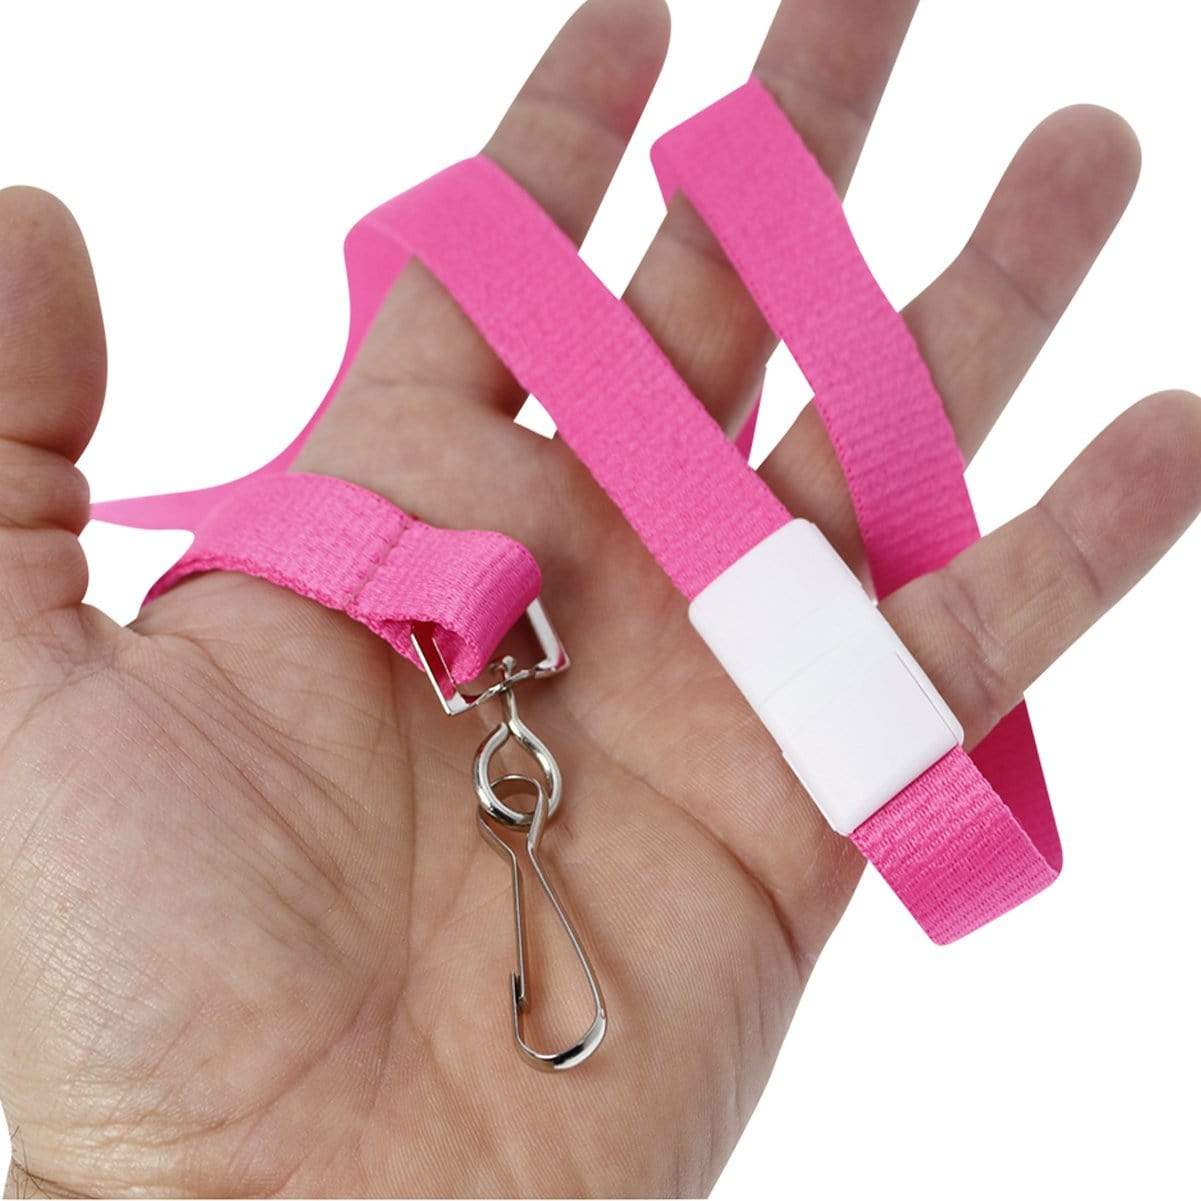 Neon Pink Lanyard with Safety Breakaway Clasp - Bright Soft Lanyards 2138-5050 Specialist ID